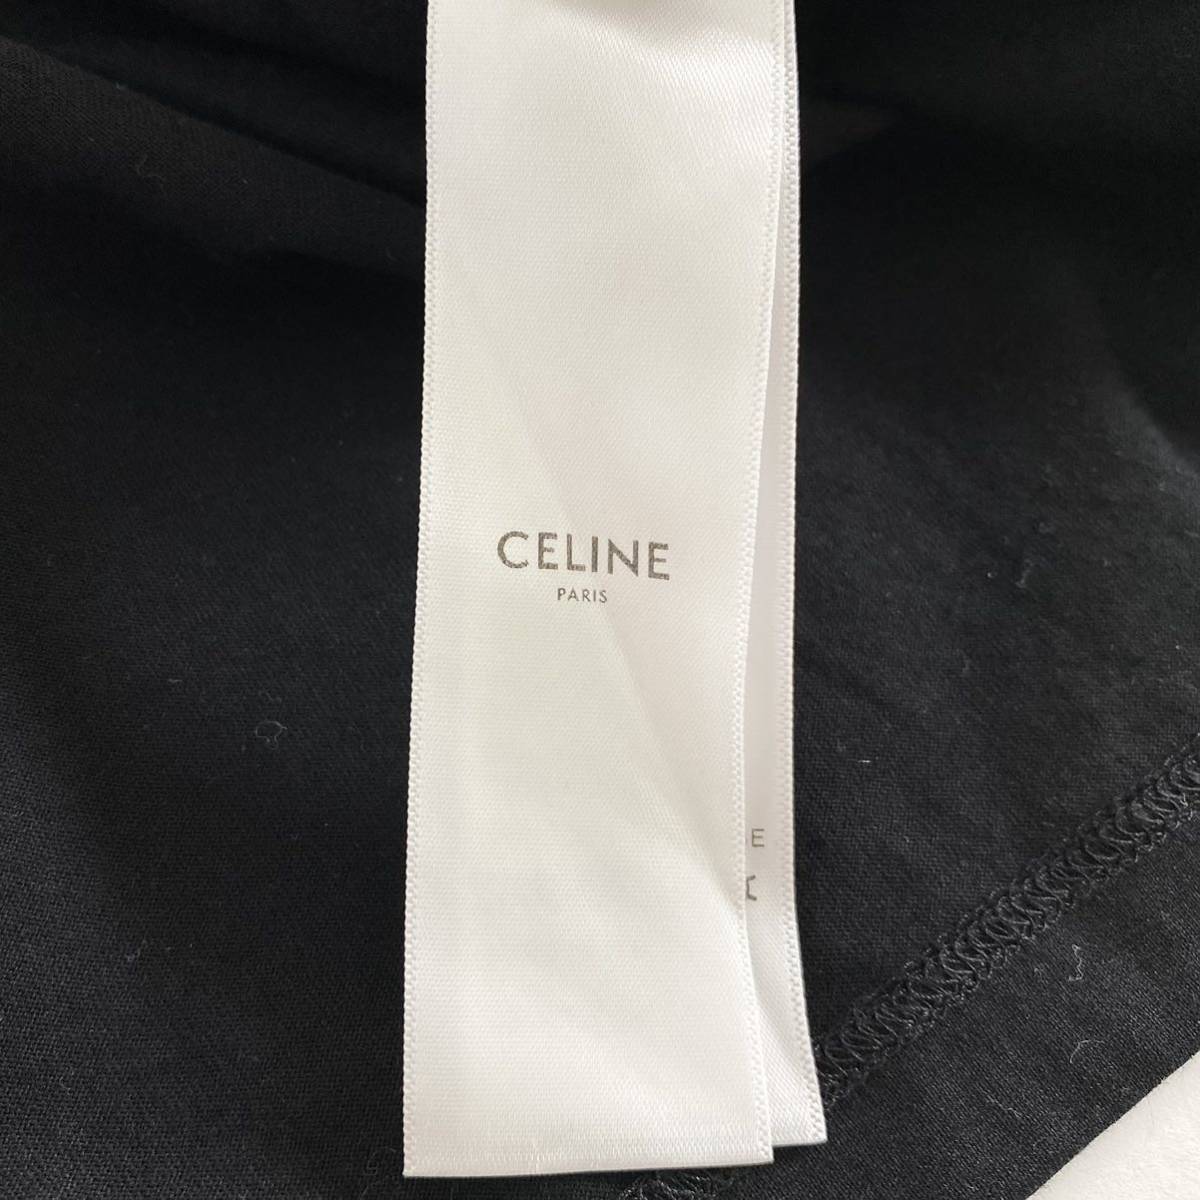 0 55i27{ beautiful goods }CELINE Celine Logo print T-shirt XS black men's short sleeves tee cut and sewn Italy made cotton spring summer high brand 